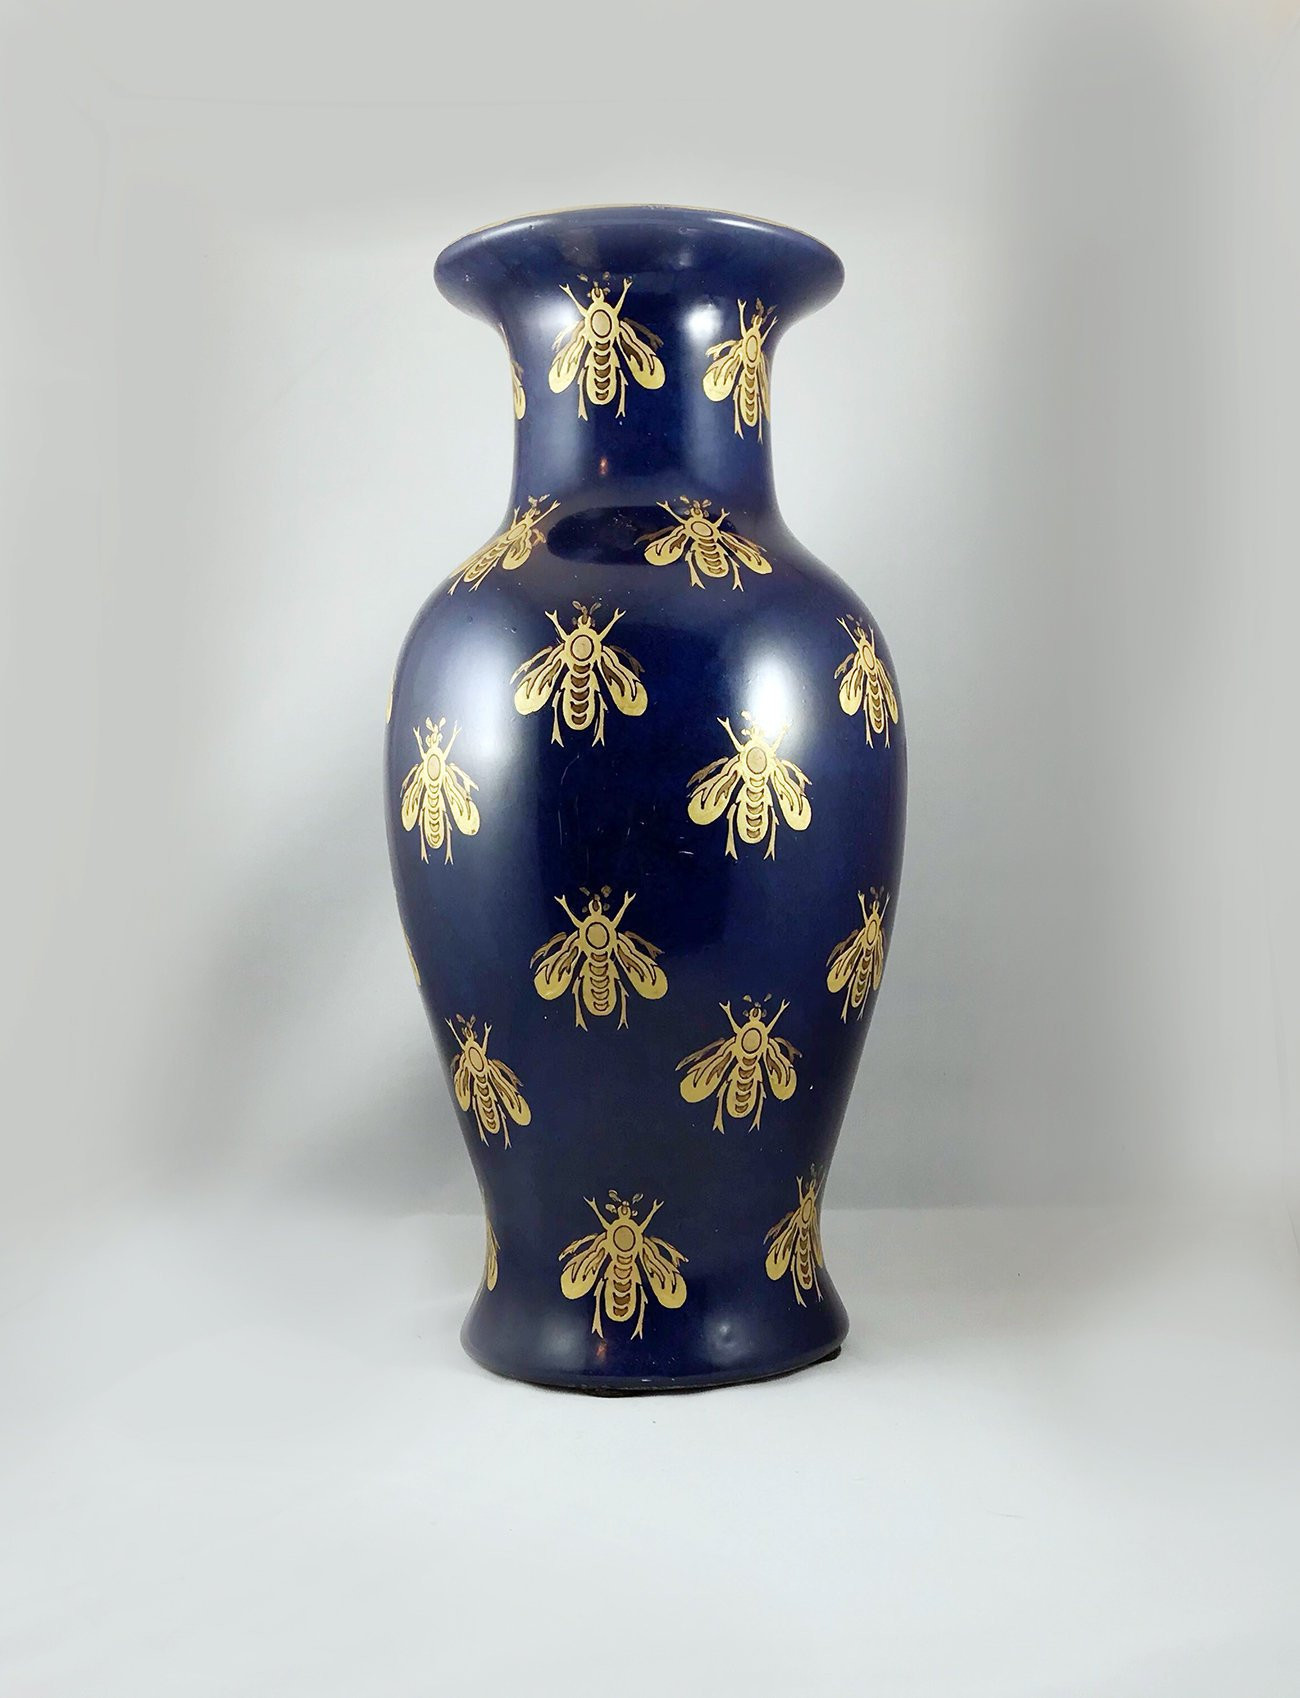 24 Great Large White Urn Vase 2023 free download large white urn vase of royal blue flower vase with golden hand painted bumble bees etsy within dc29fc294c28ezoom